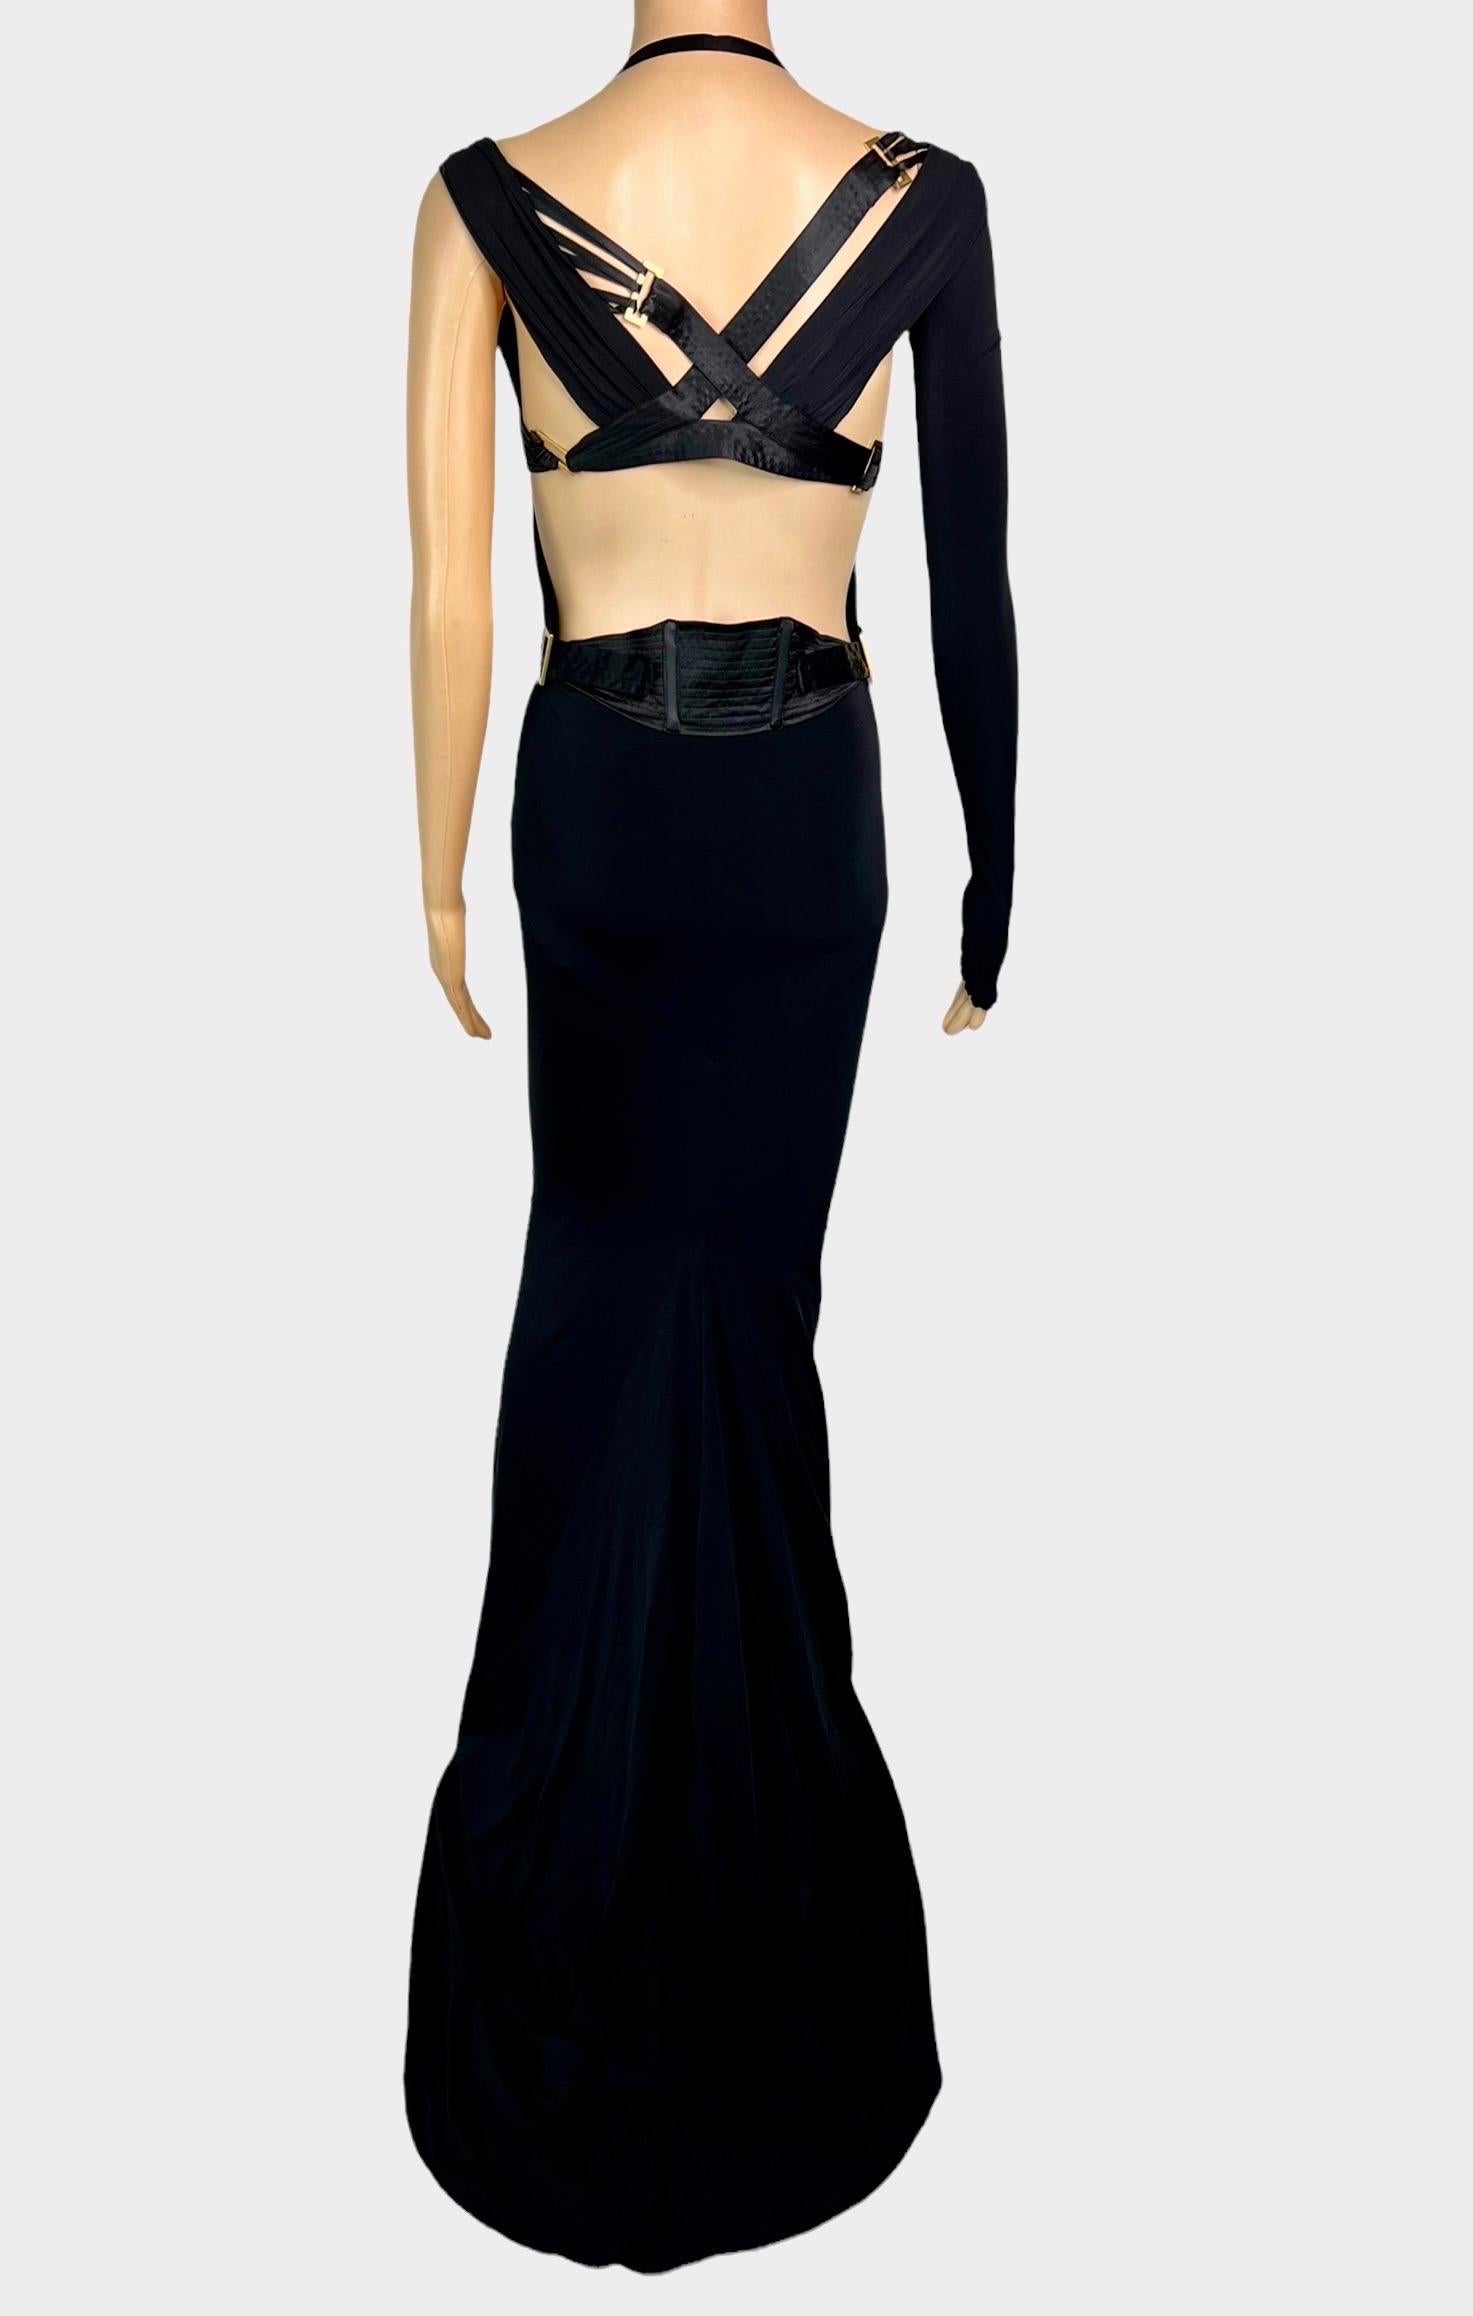 Tom Ford for Gucci F/W 2003 Bustier Corset Cutout Train Black Evening Dress Gown 2